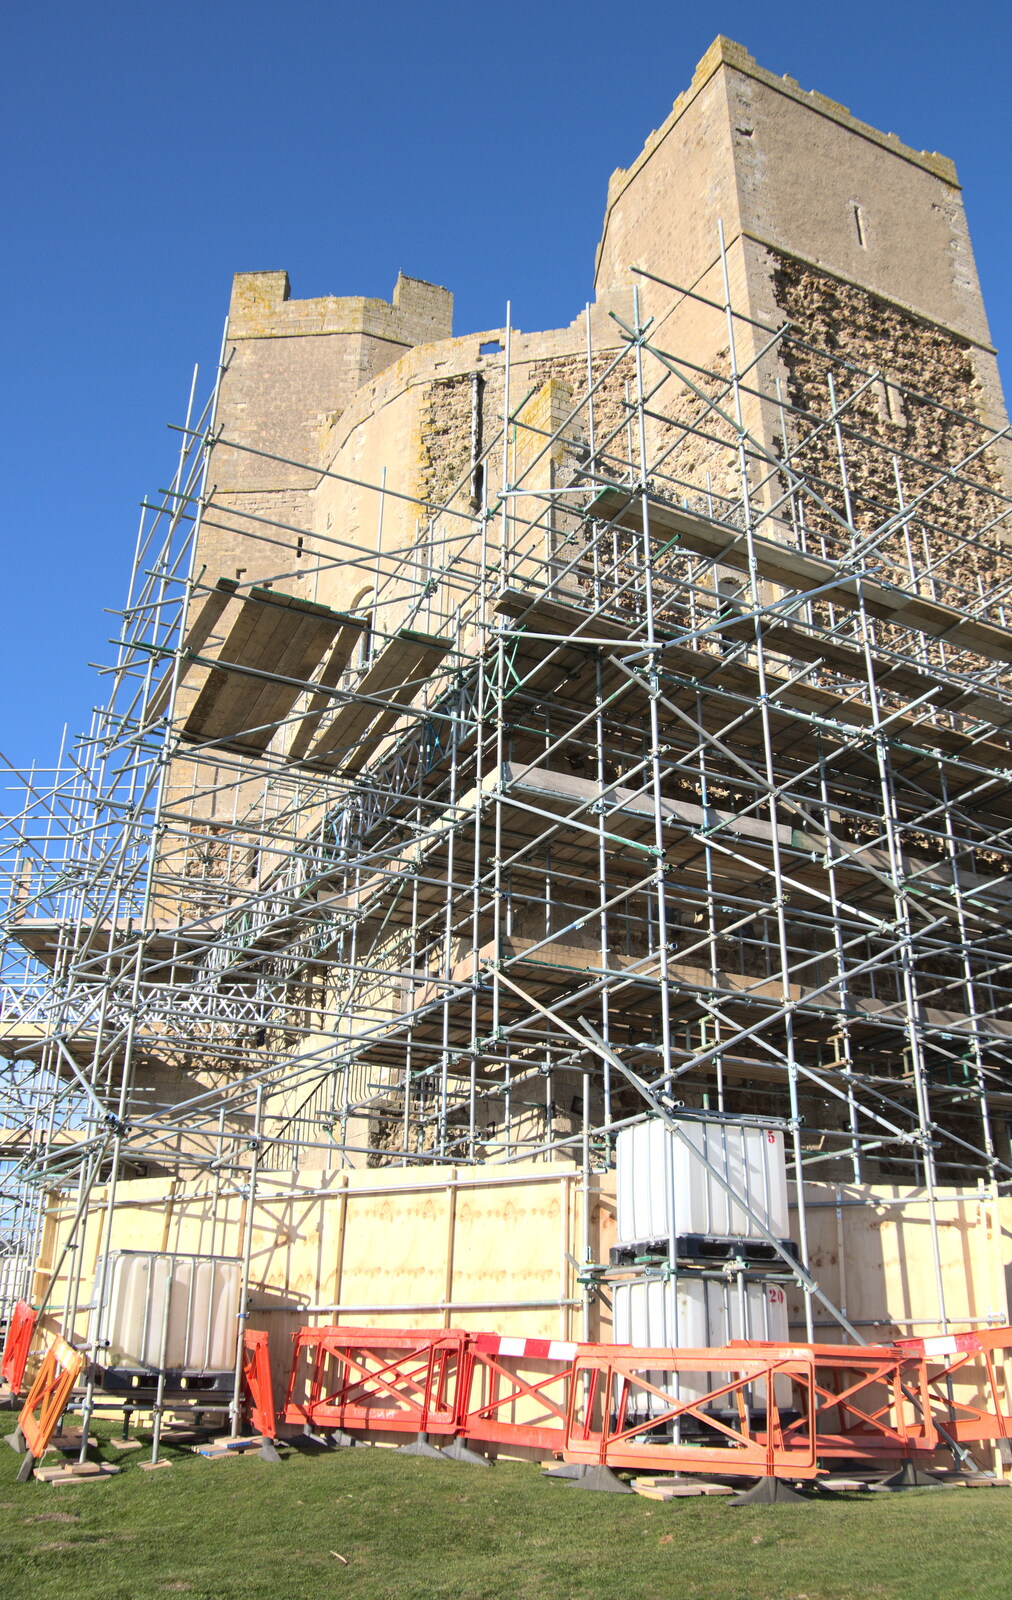 Orford Castle has a major scaffolding job on from A Trip to Orford Castle, Orford, Suffolk - 26th February 2022